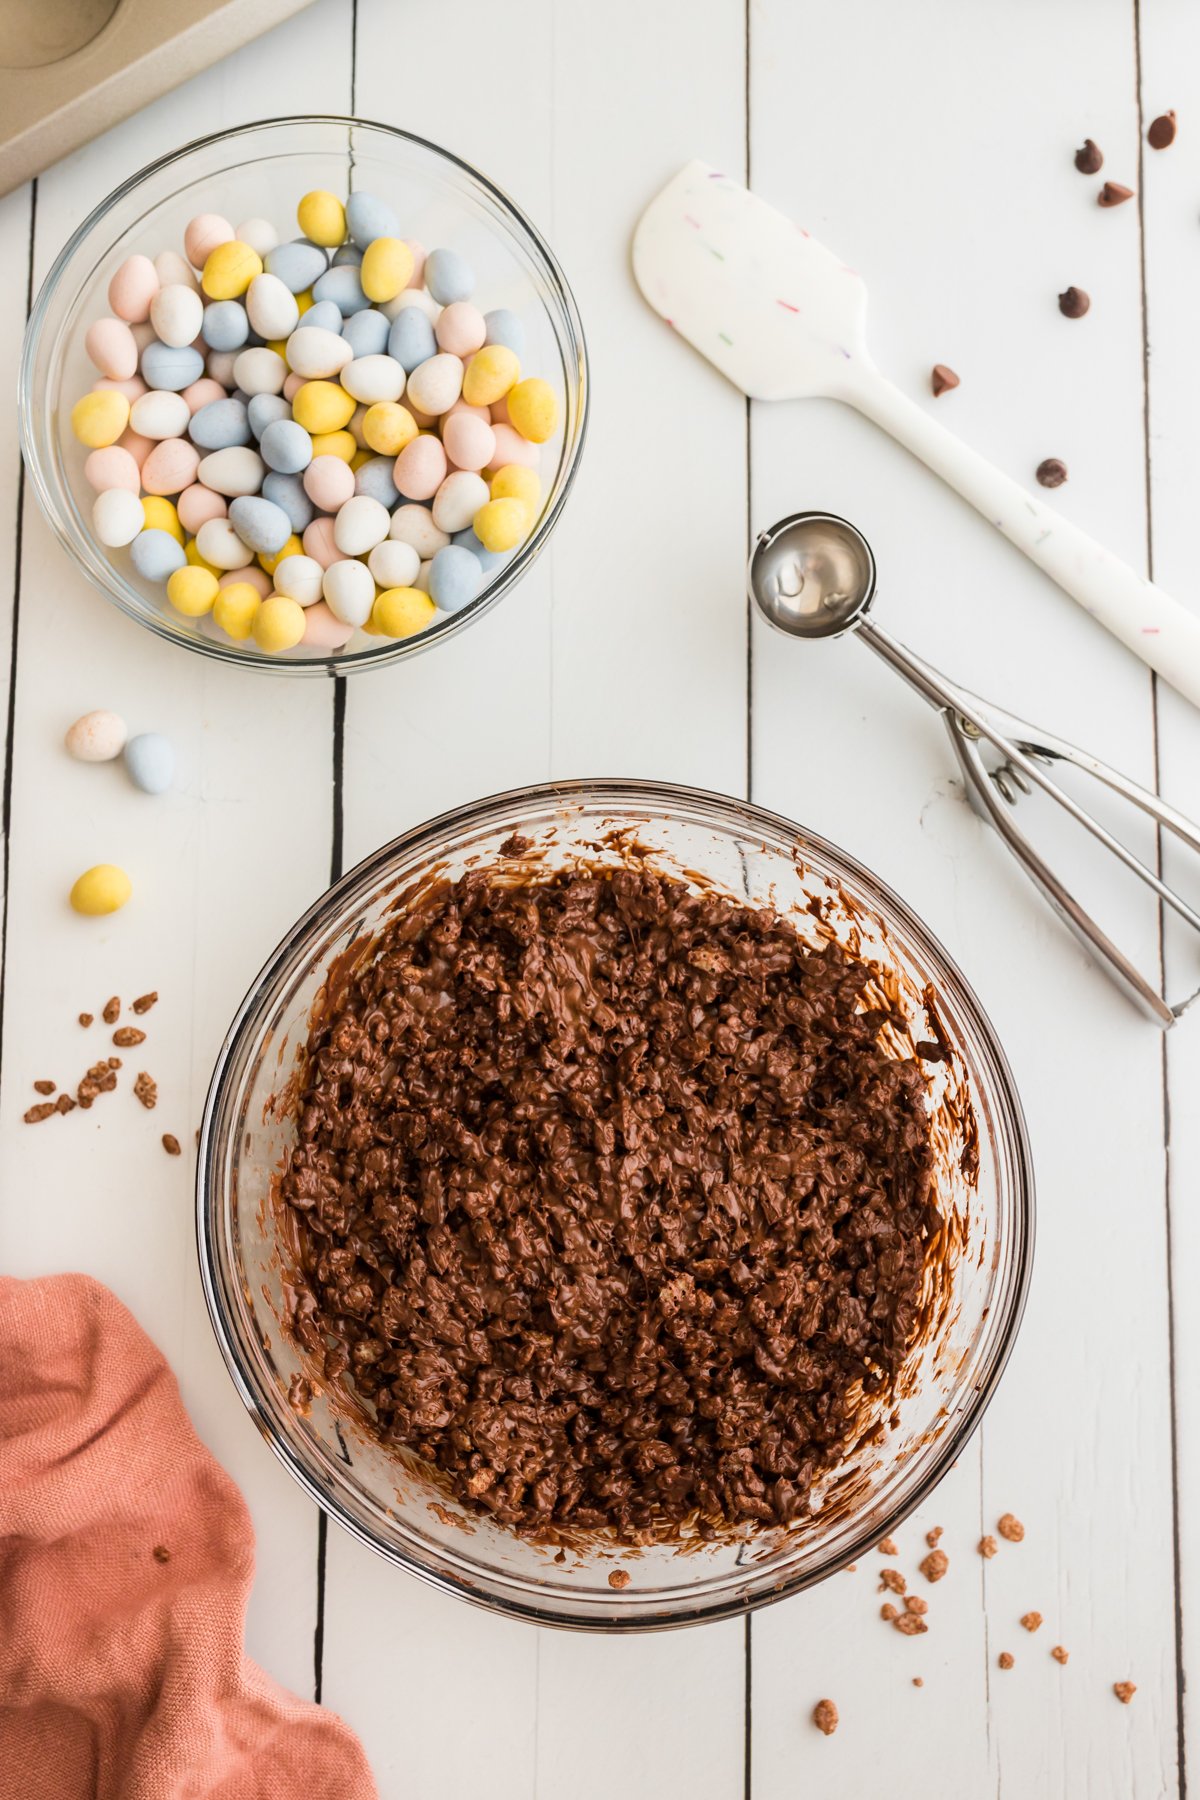 mixture for chocolate nests in a glass bowl